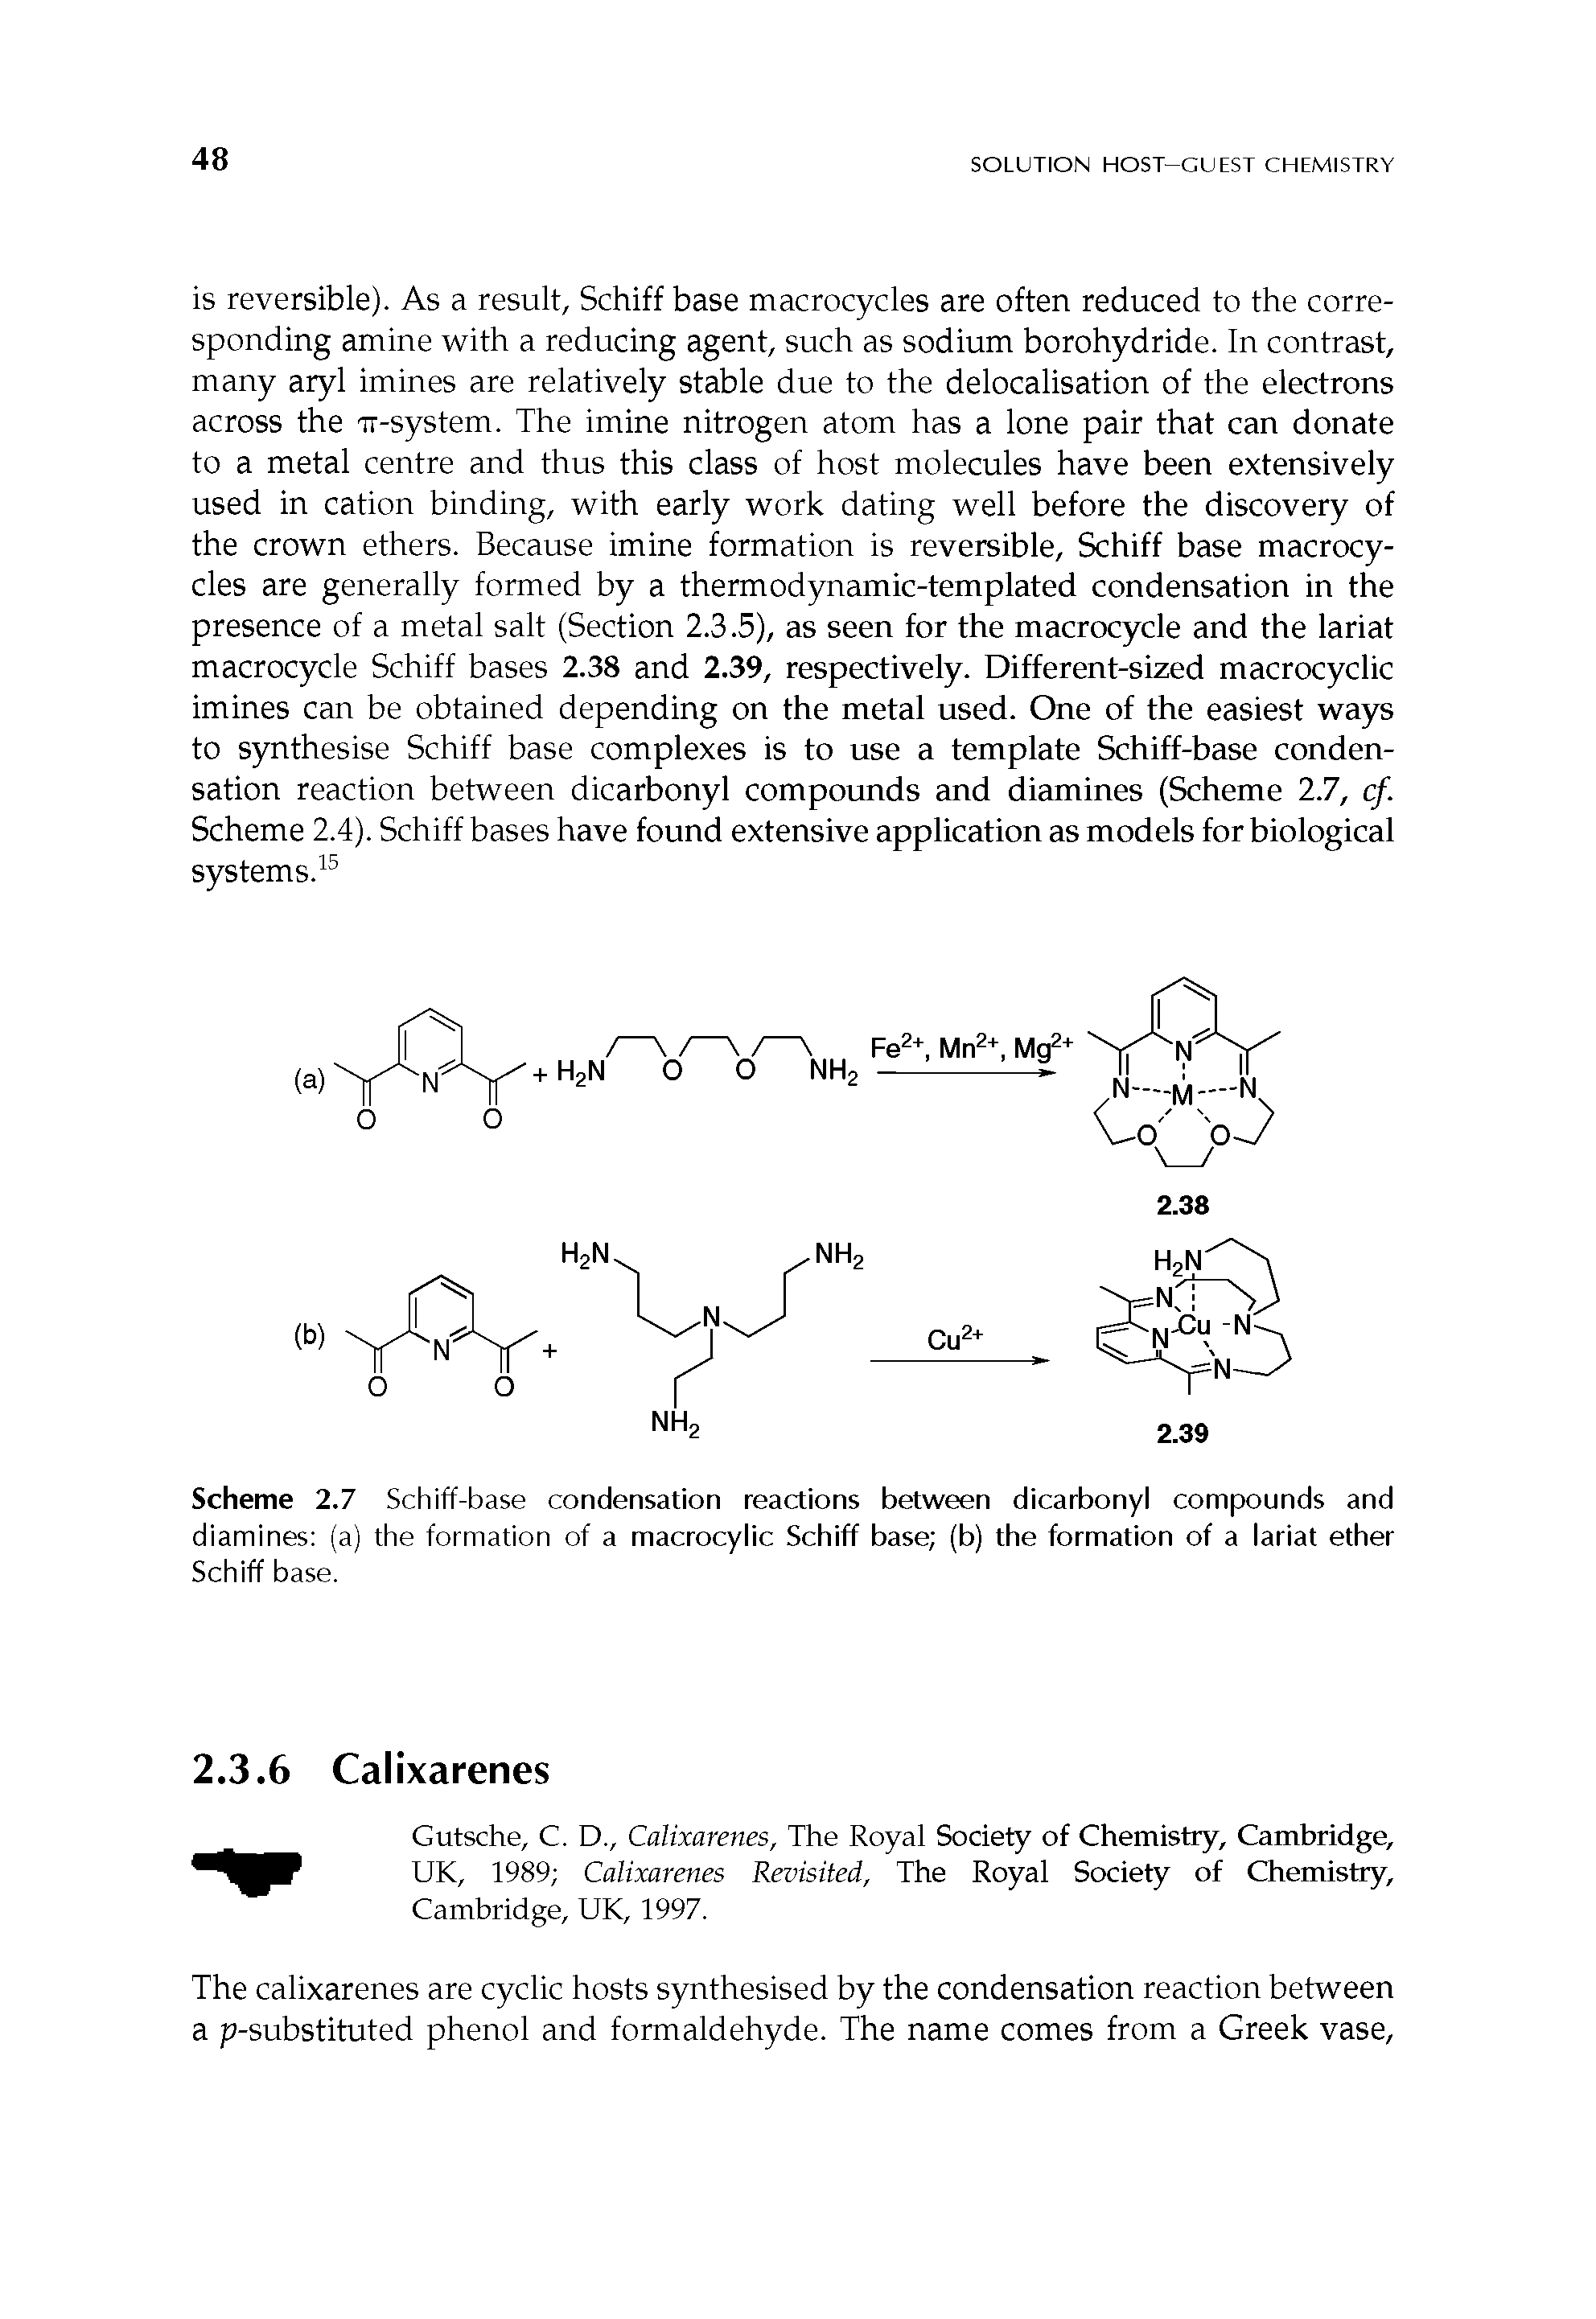 Scheme 2.7 Schiff-base condensation reactions between dicarbonyl compounds and diamines (a) the formation of a macrocylic Schiff base (b) the formation of a lariat ether Schiff base.